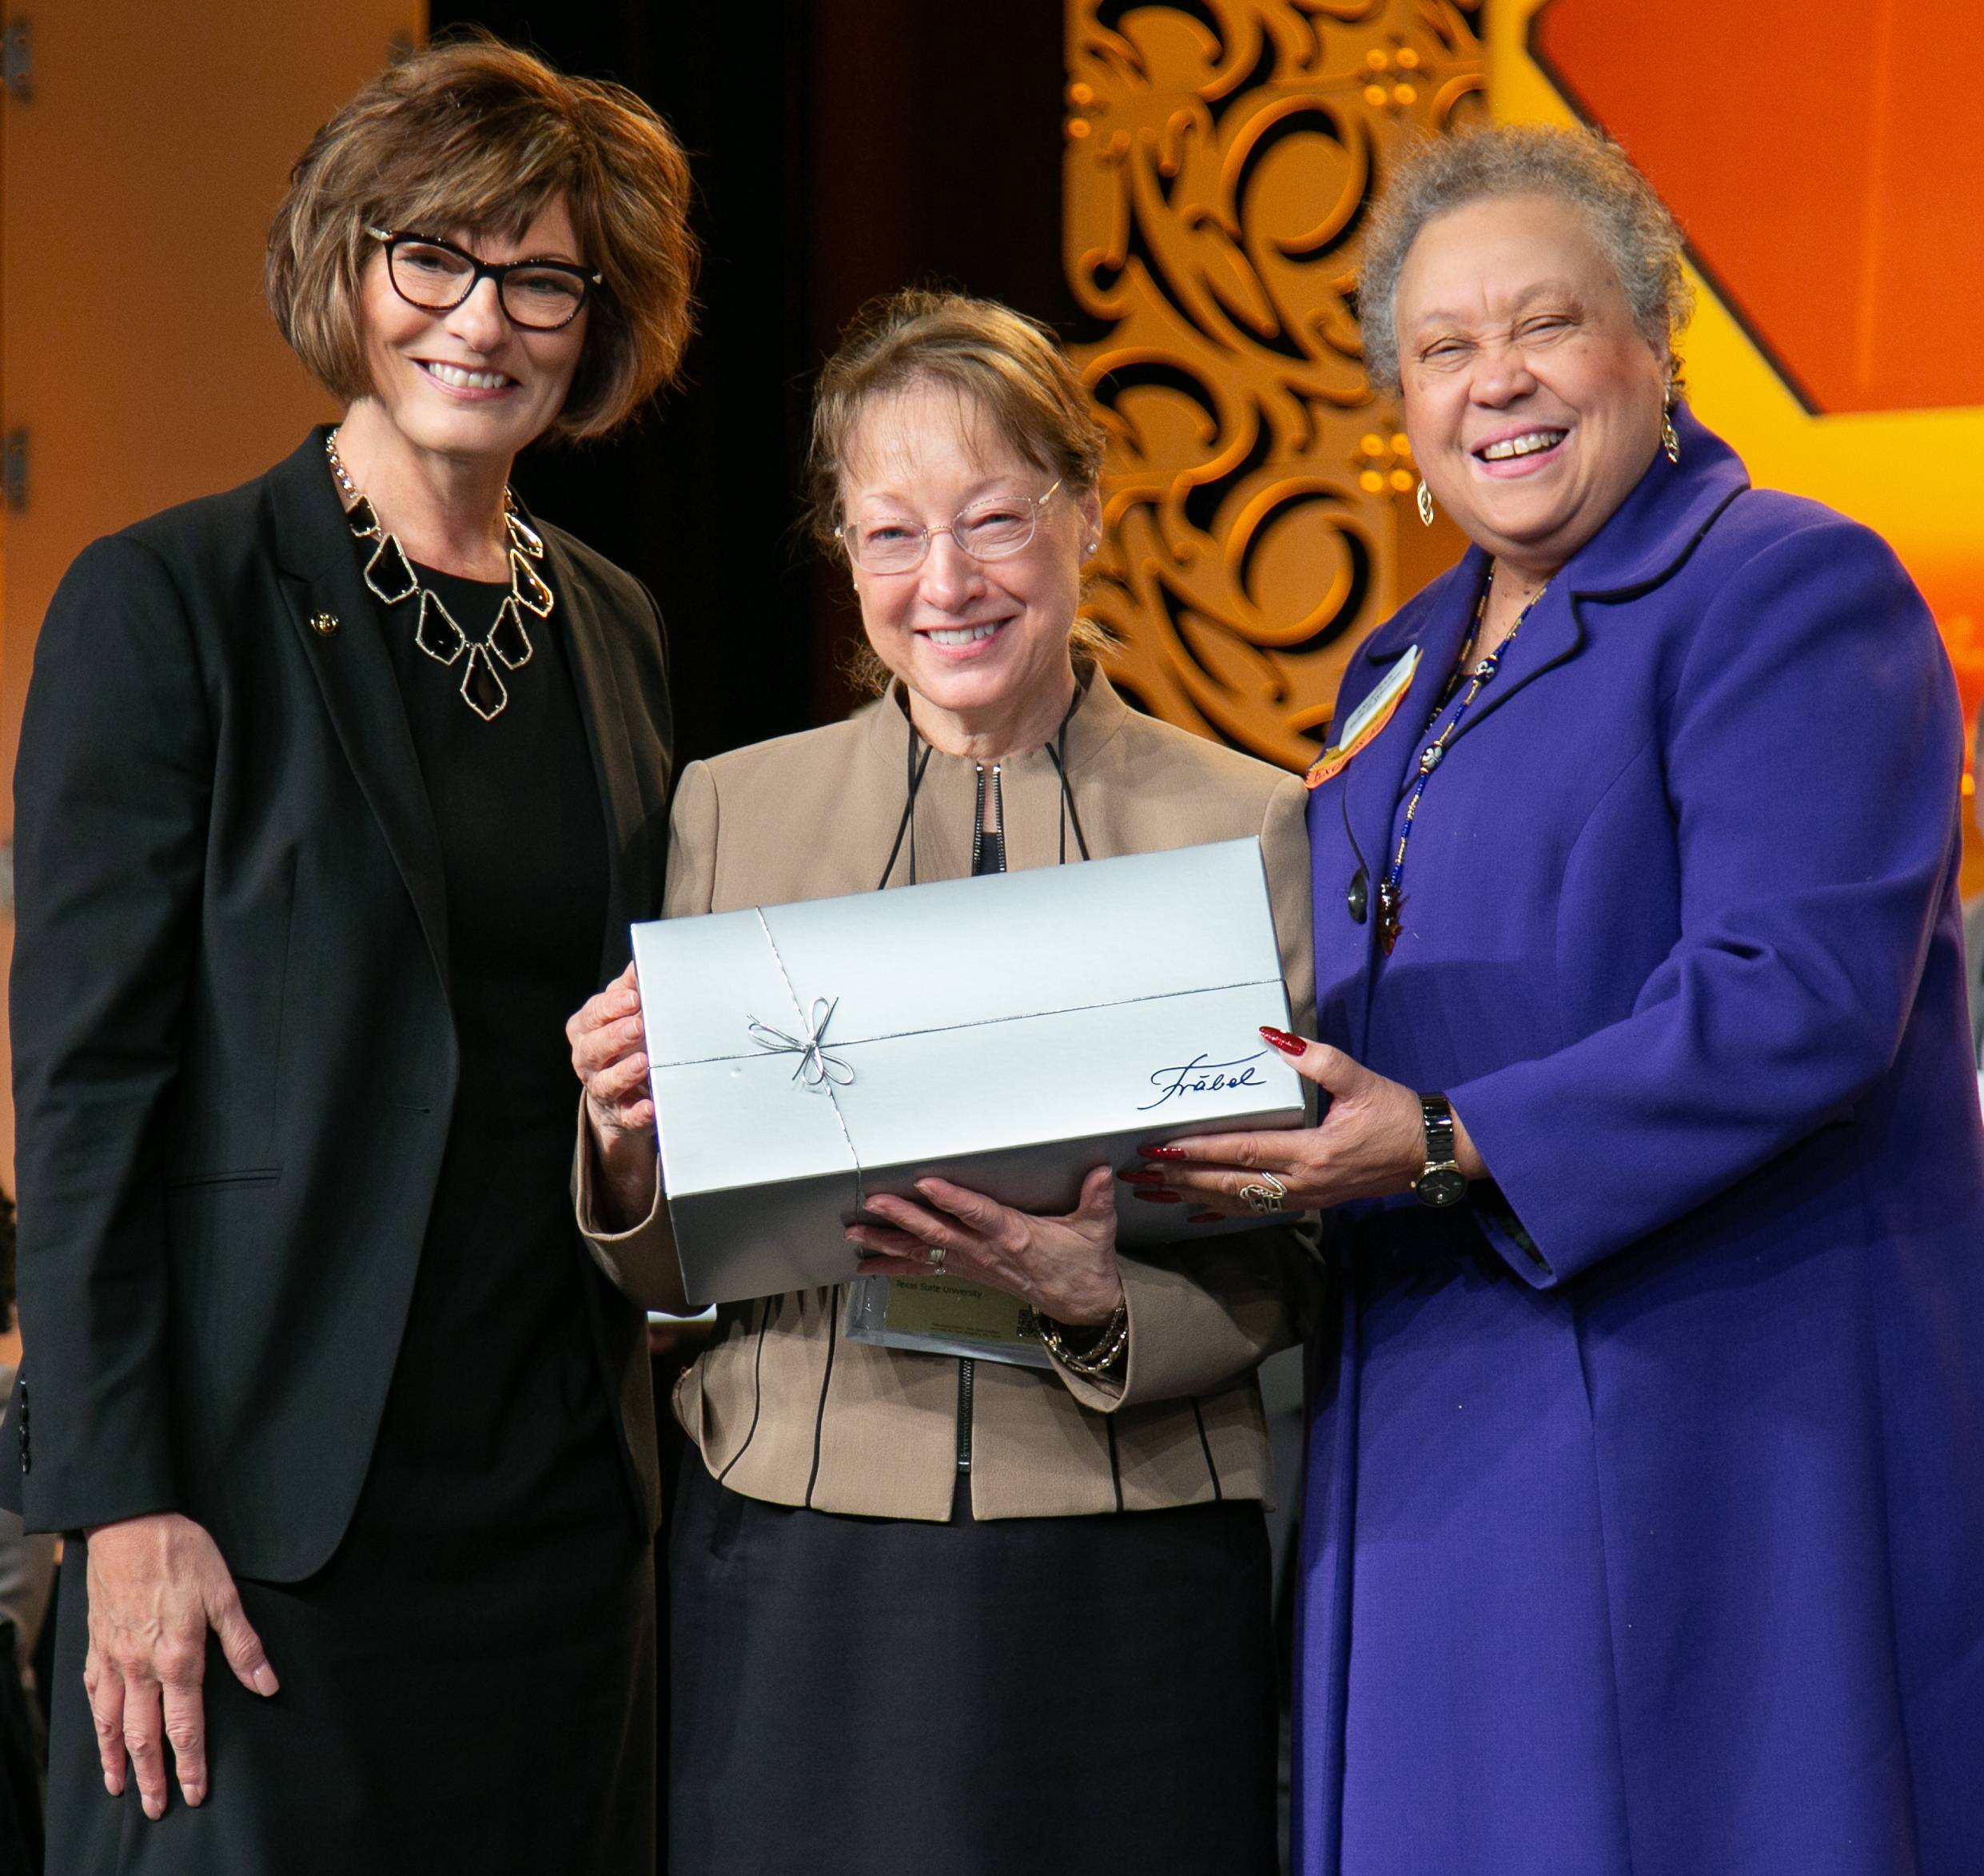 Brenda Helllyer, San Jacinto College chancellor and chair of the Southern Association of Colleges and Schools Commission on Colleges (SACSCOC) board of trustees; Denise M. Trauth, president of Texas State University and recipient of SACSCOC's Carol A. Luthman Meritorious Service Award; and Belle S. Wheelan, president of Southern Association of Colleges and Schools Commission on Colleges.